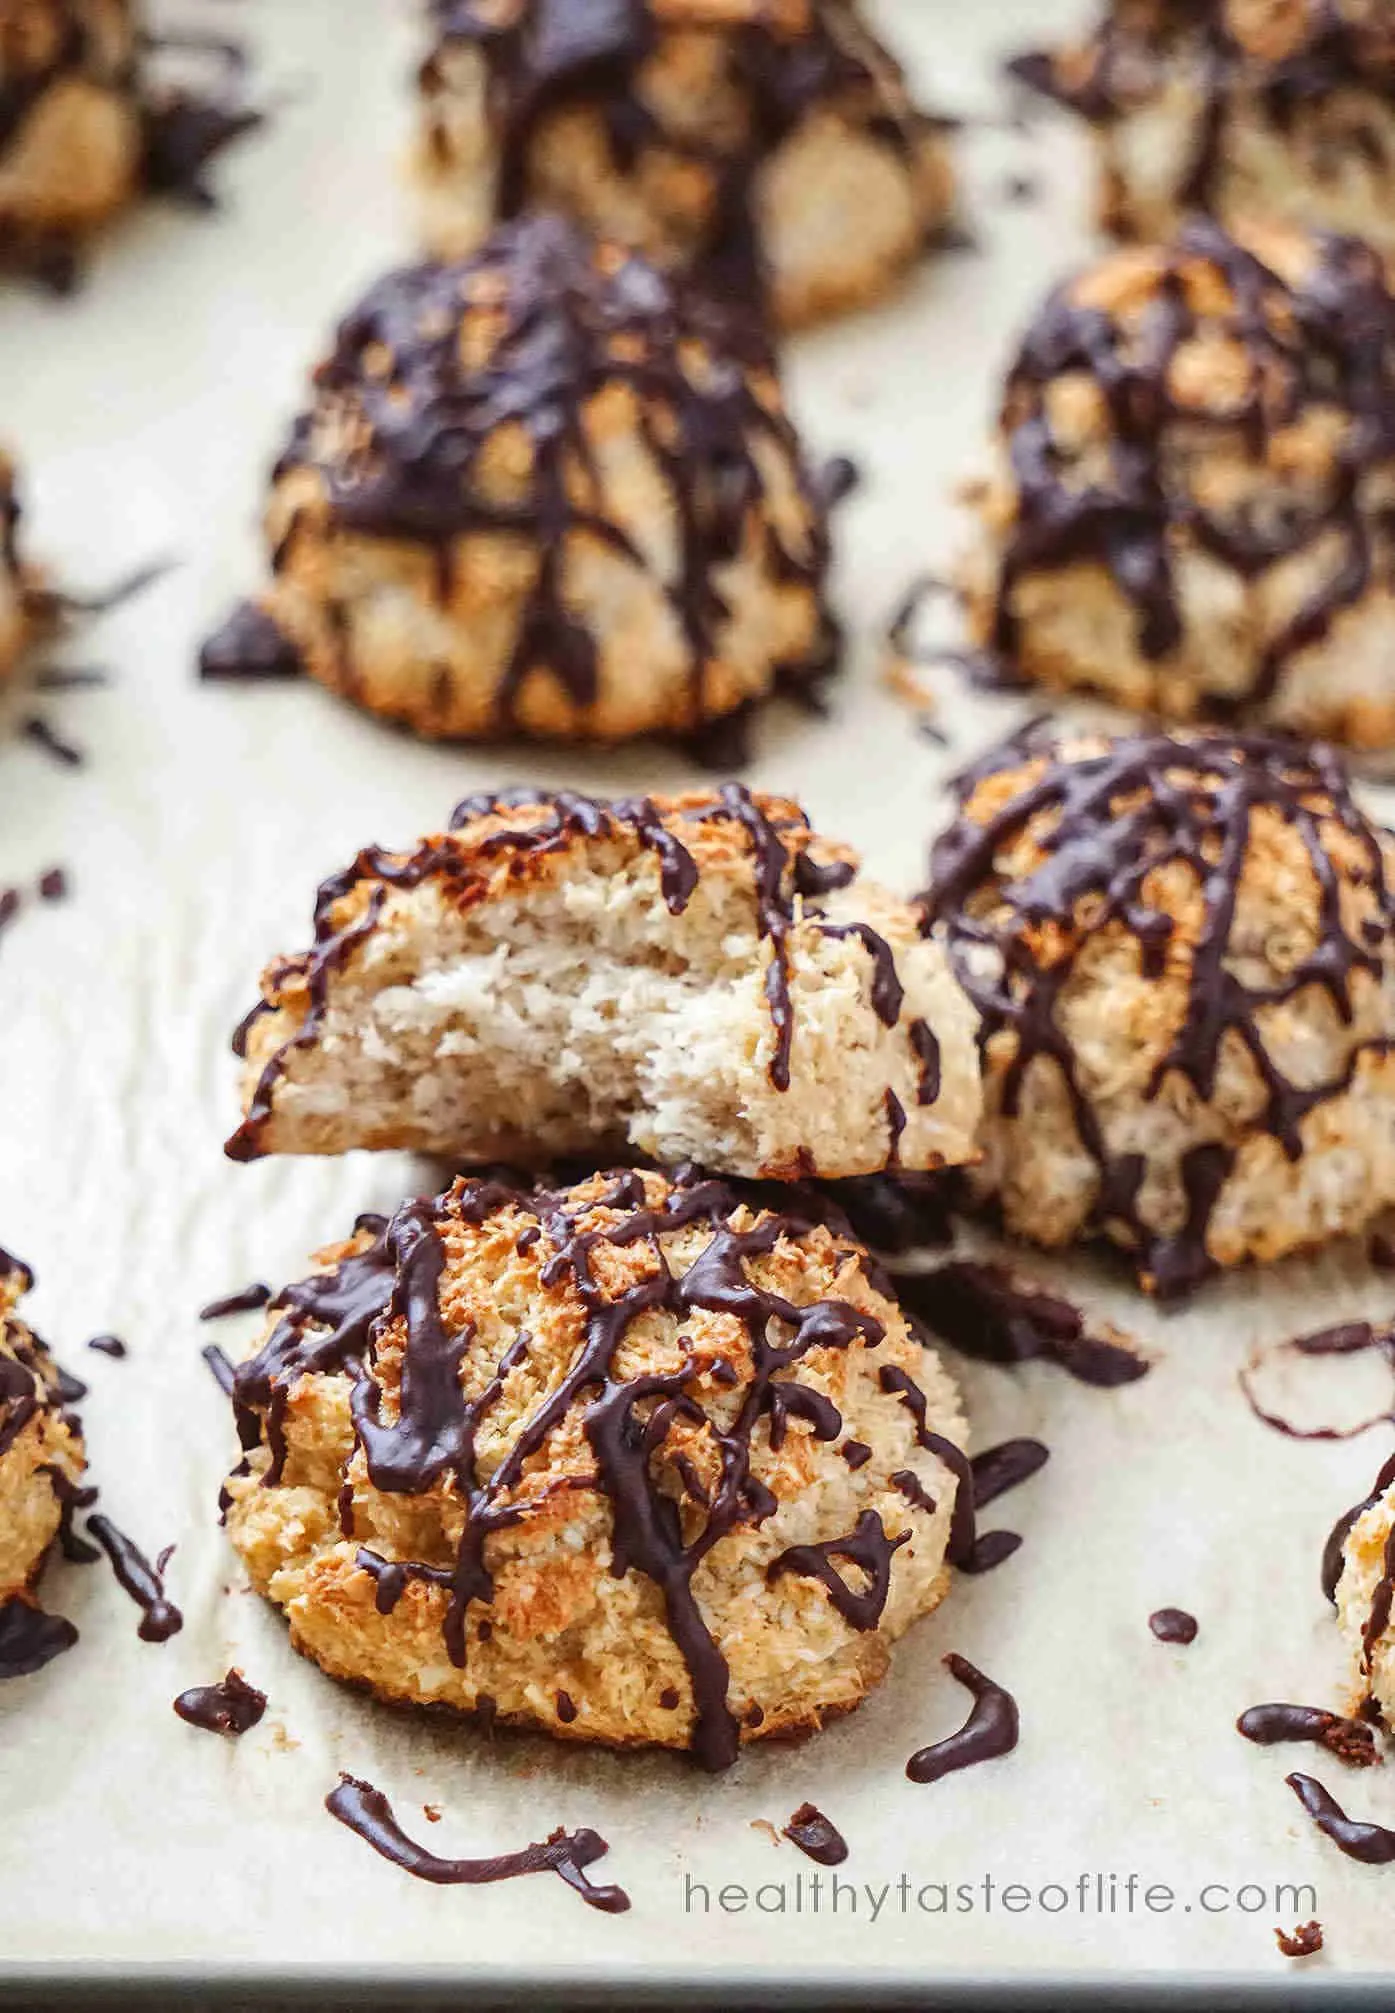 The best gluten free coconut macaroons recipe made with egg whites and without condensed milk (dairy free recipe).